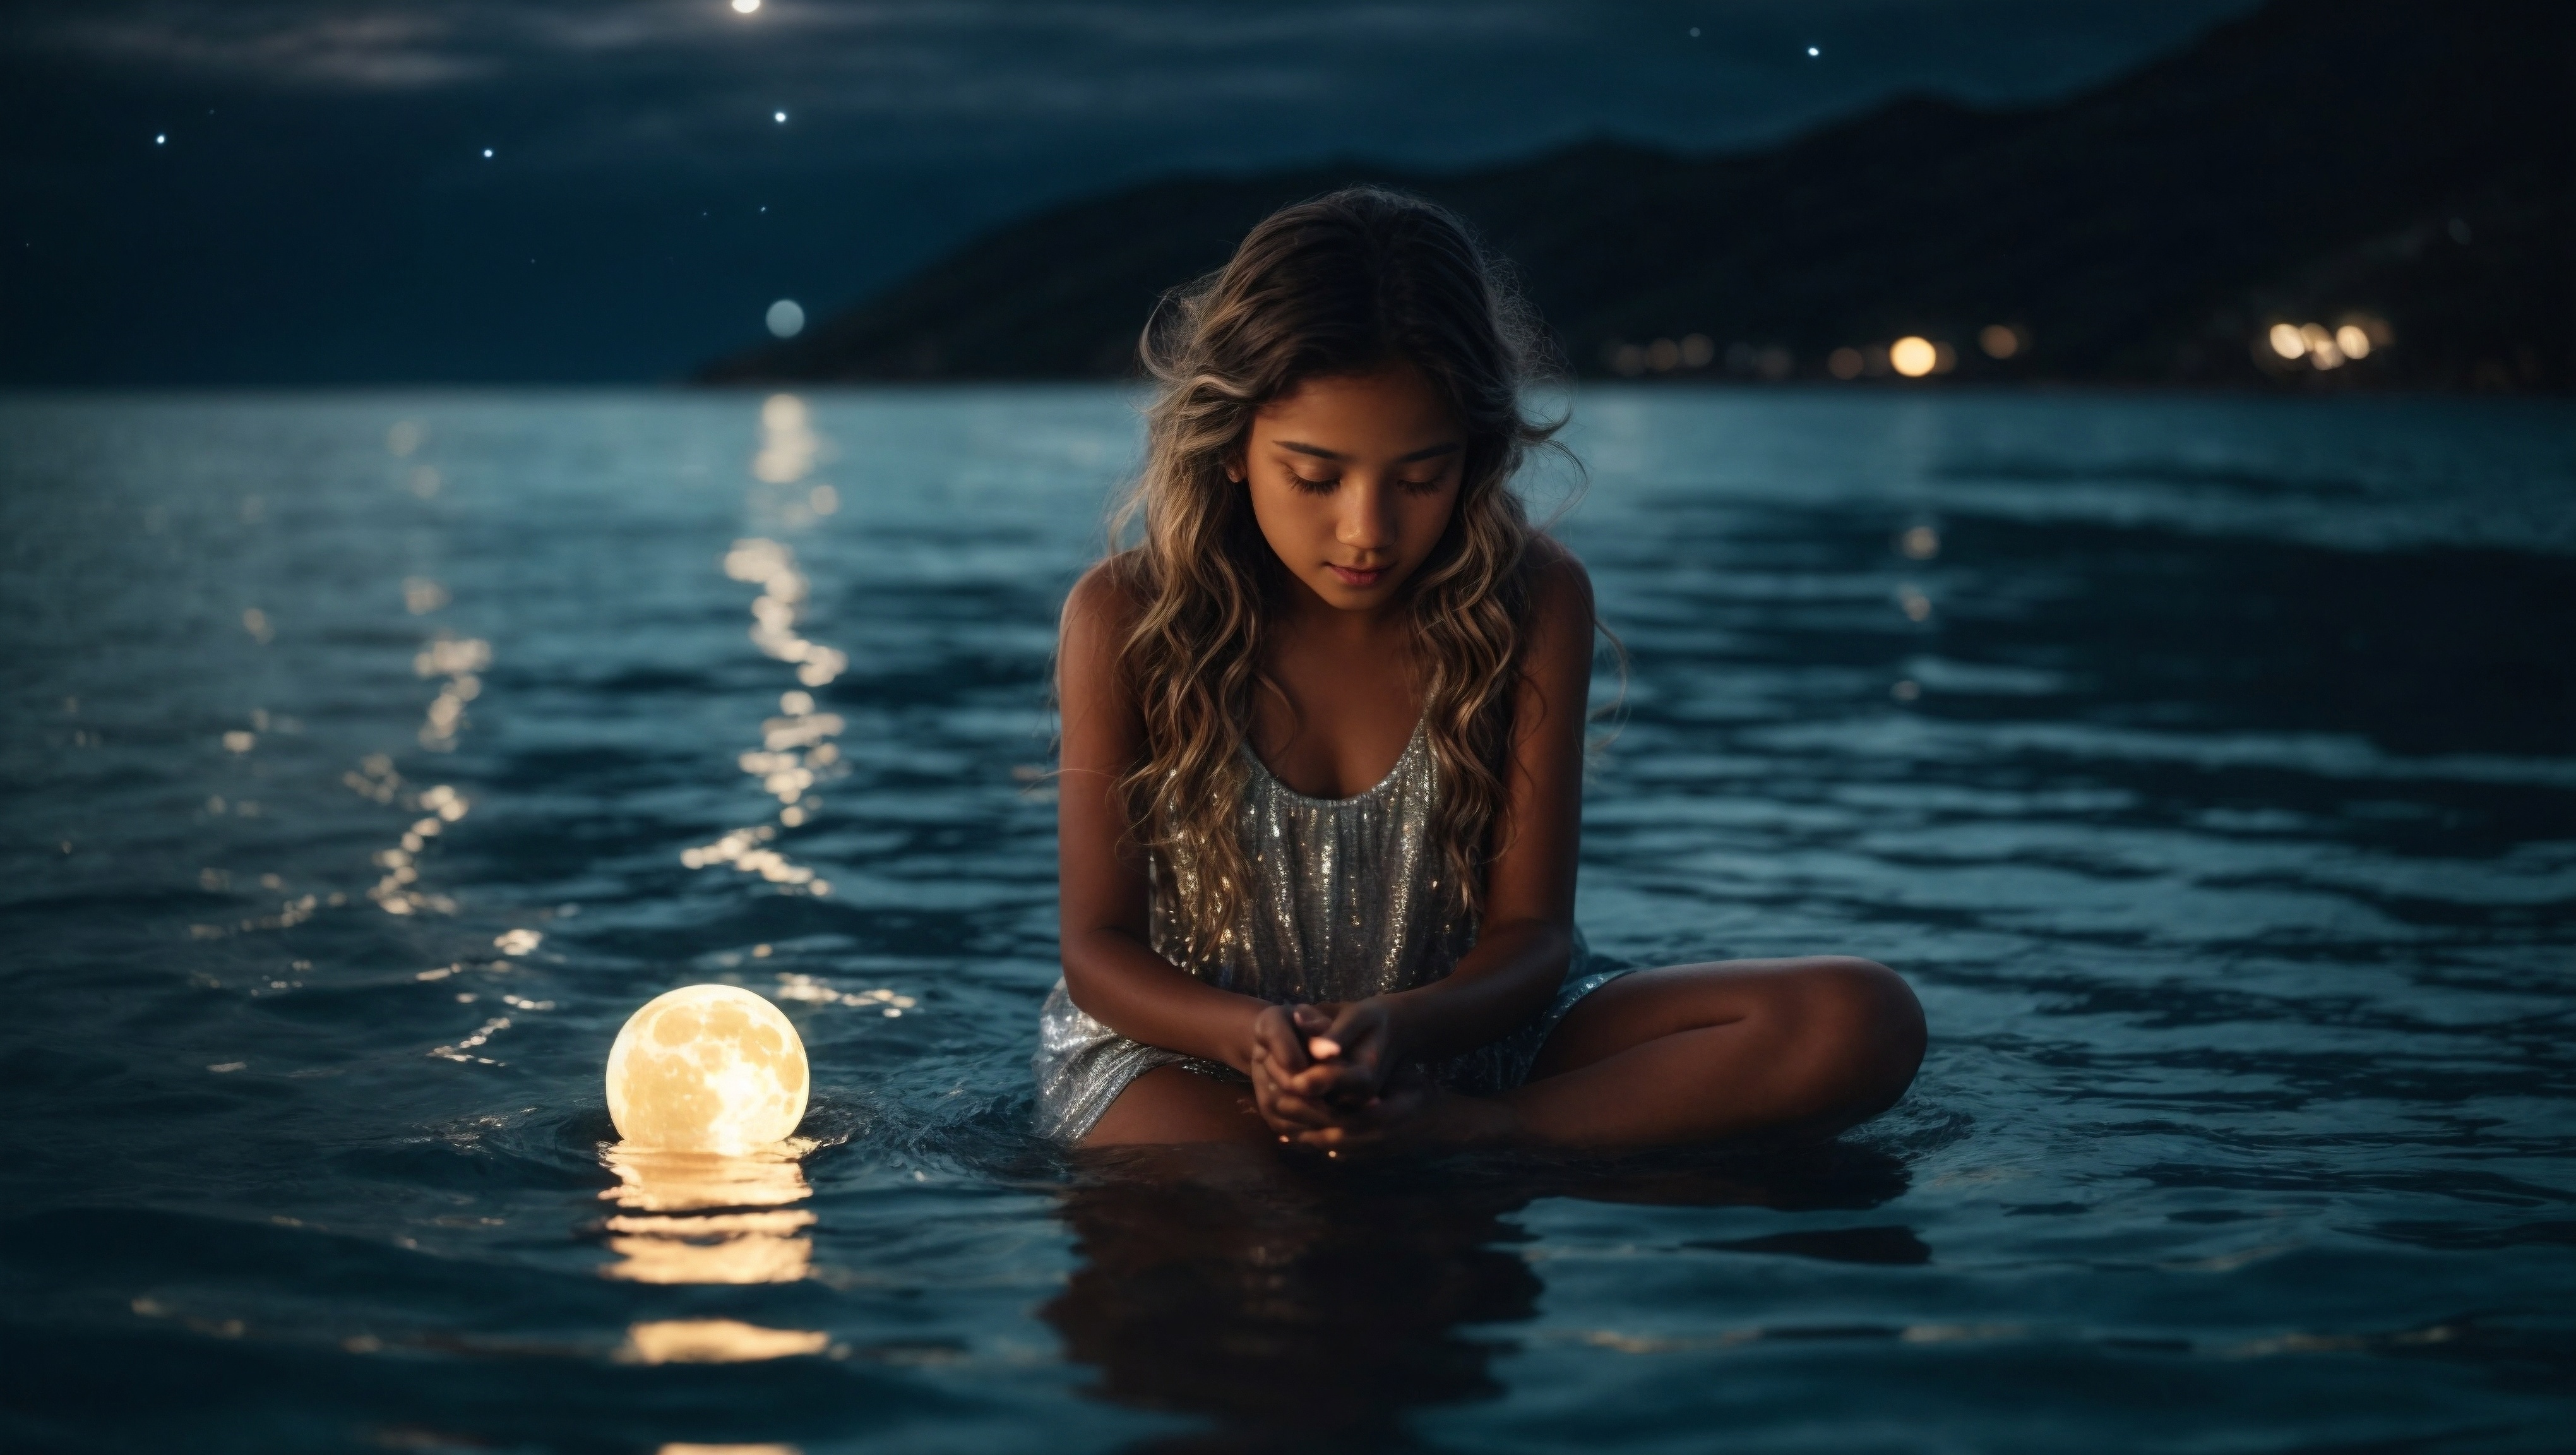 Free photo Girl in silver dress sitting in body of water by a floating lamp